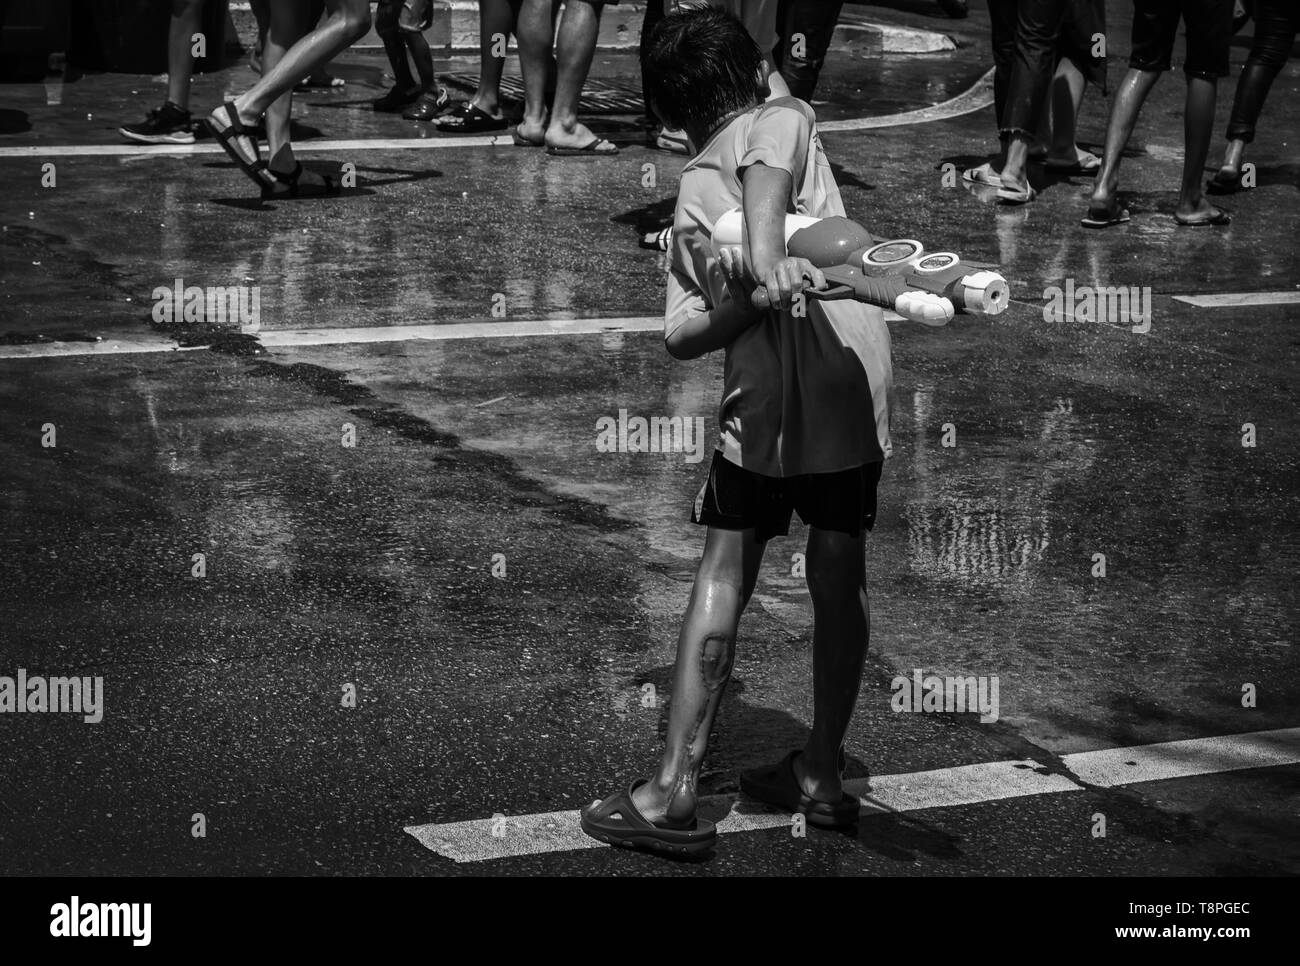 A young boy shot with water in Songkran Stock Photo